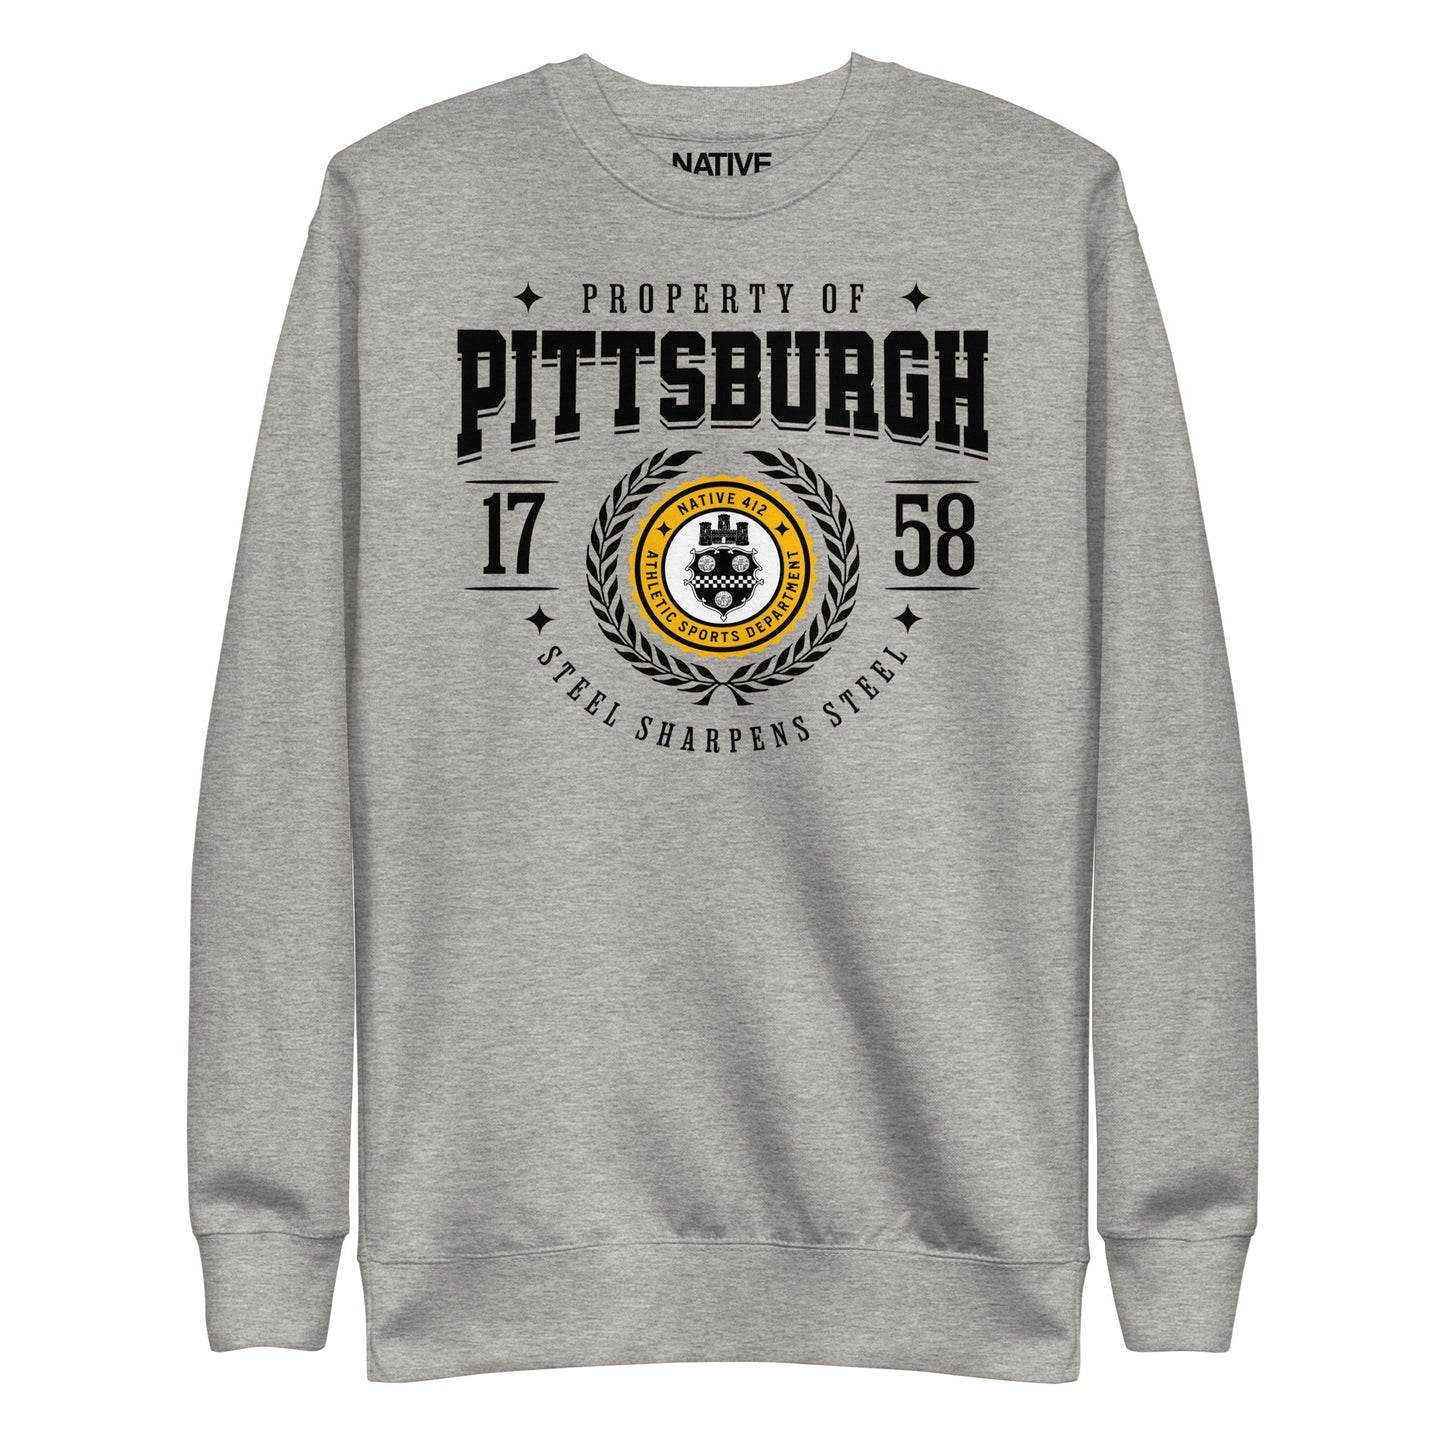 Property of Pittsburgh - Steel Sharpens Steel -Athletic Grey Sweater